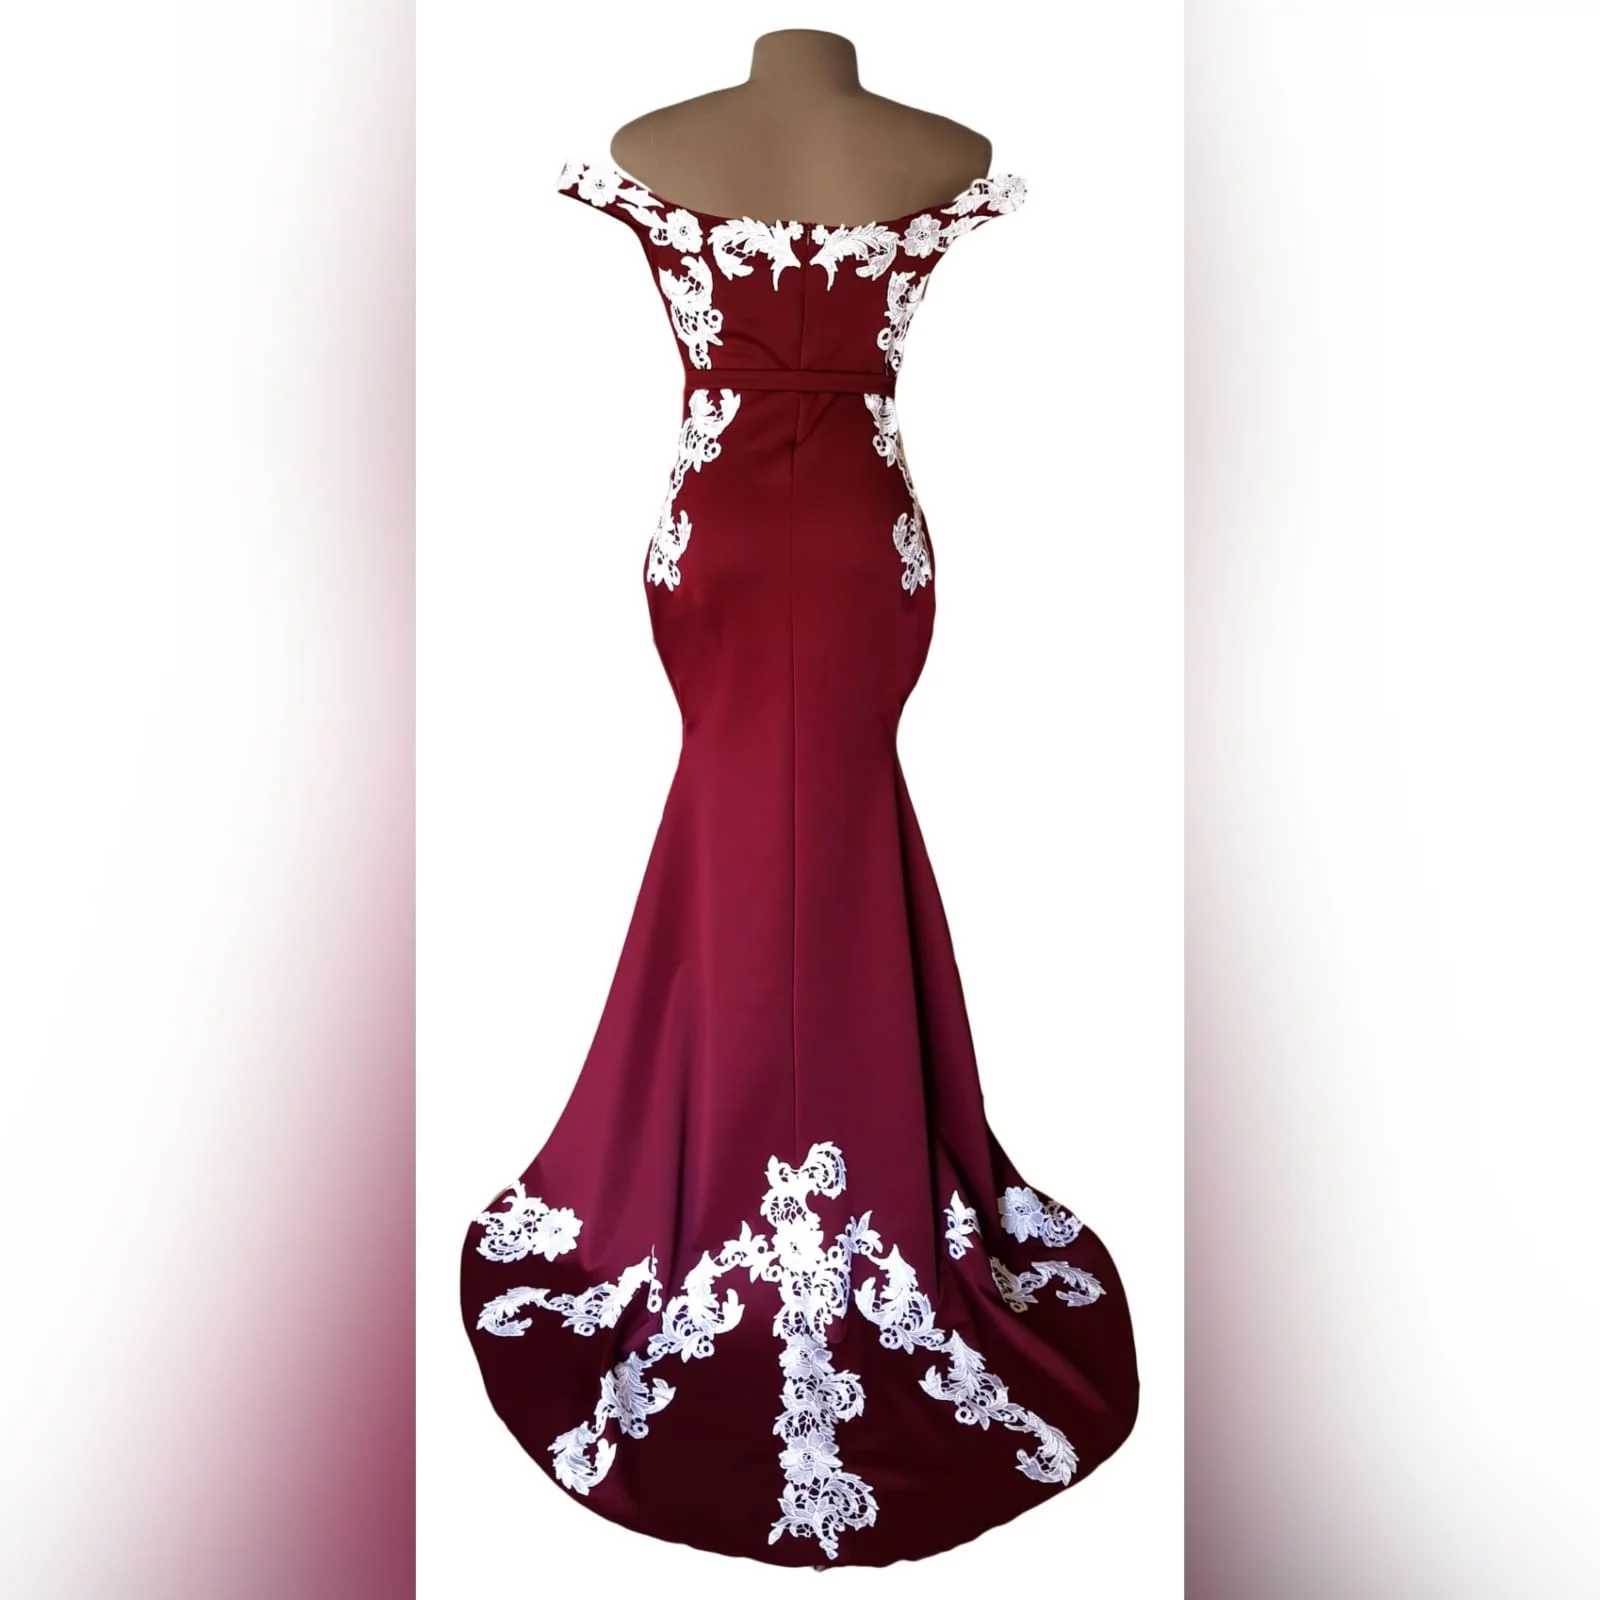 Maroon and white off shoulder soft mermaid prom dress 2 maroon and white off shoulder soft mermaid prom dress. With bodice, hips and train detailed with white lace.